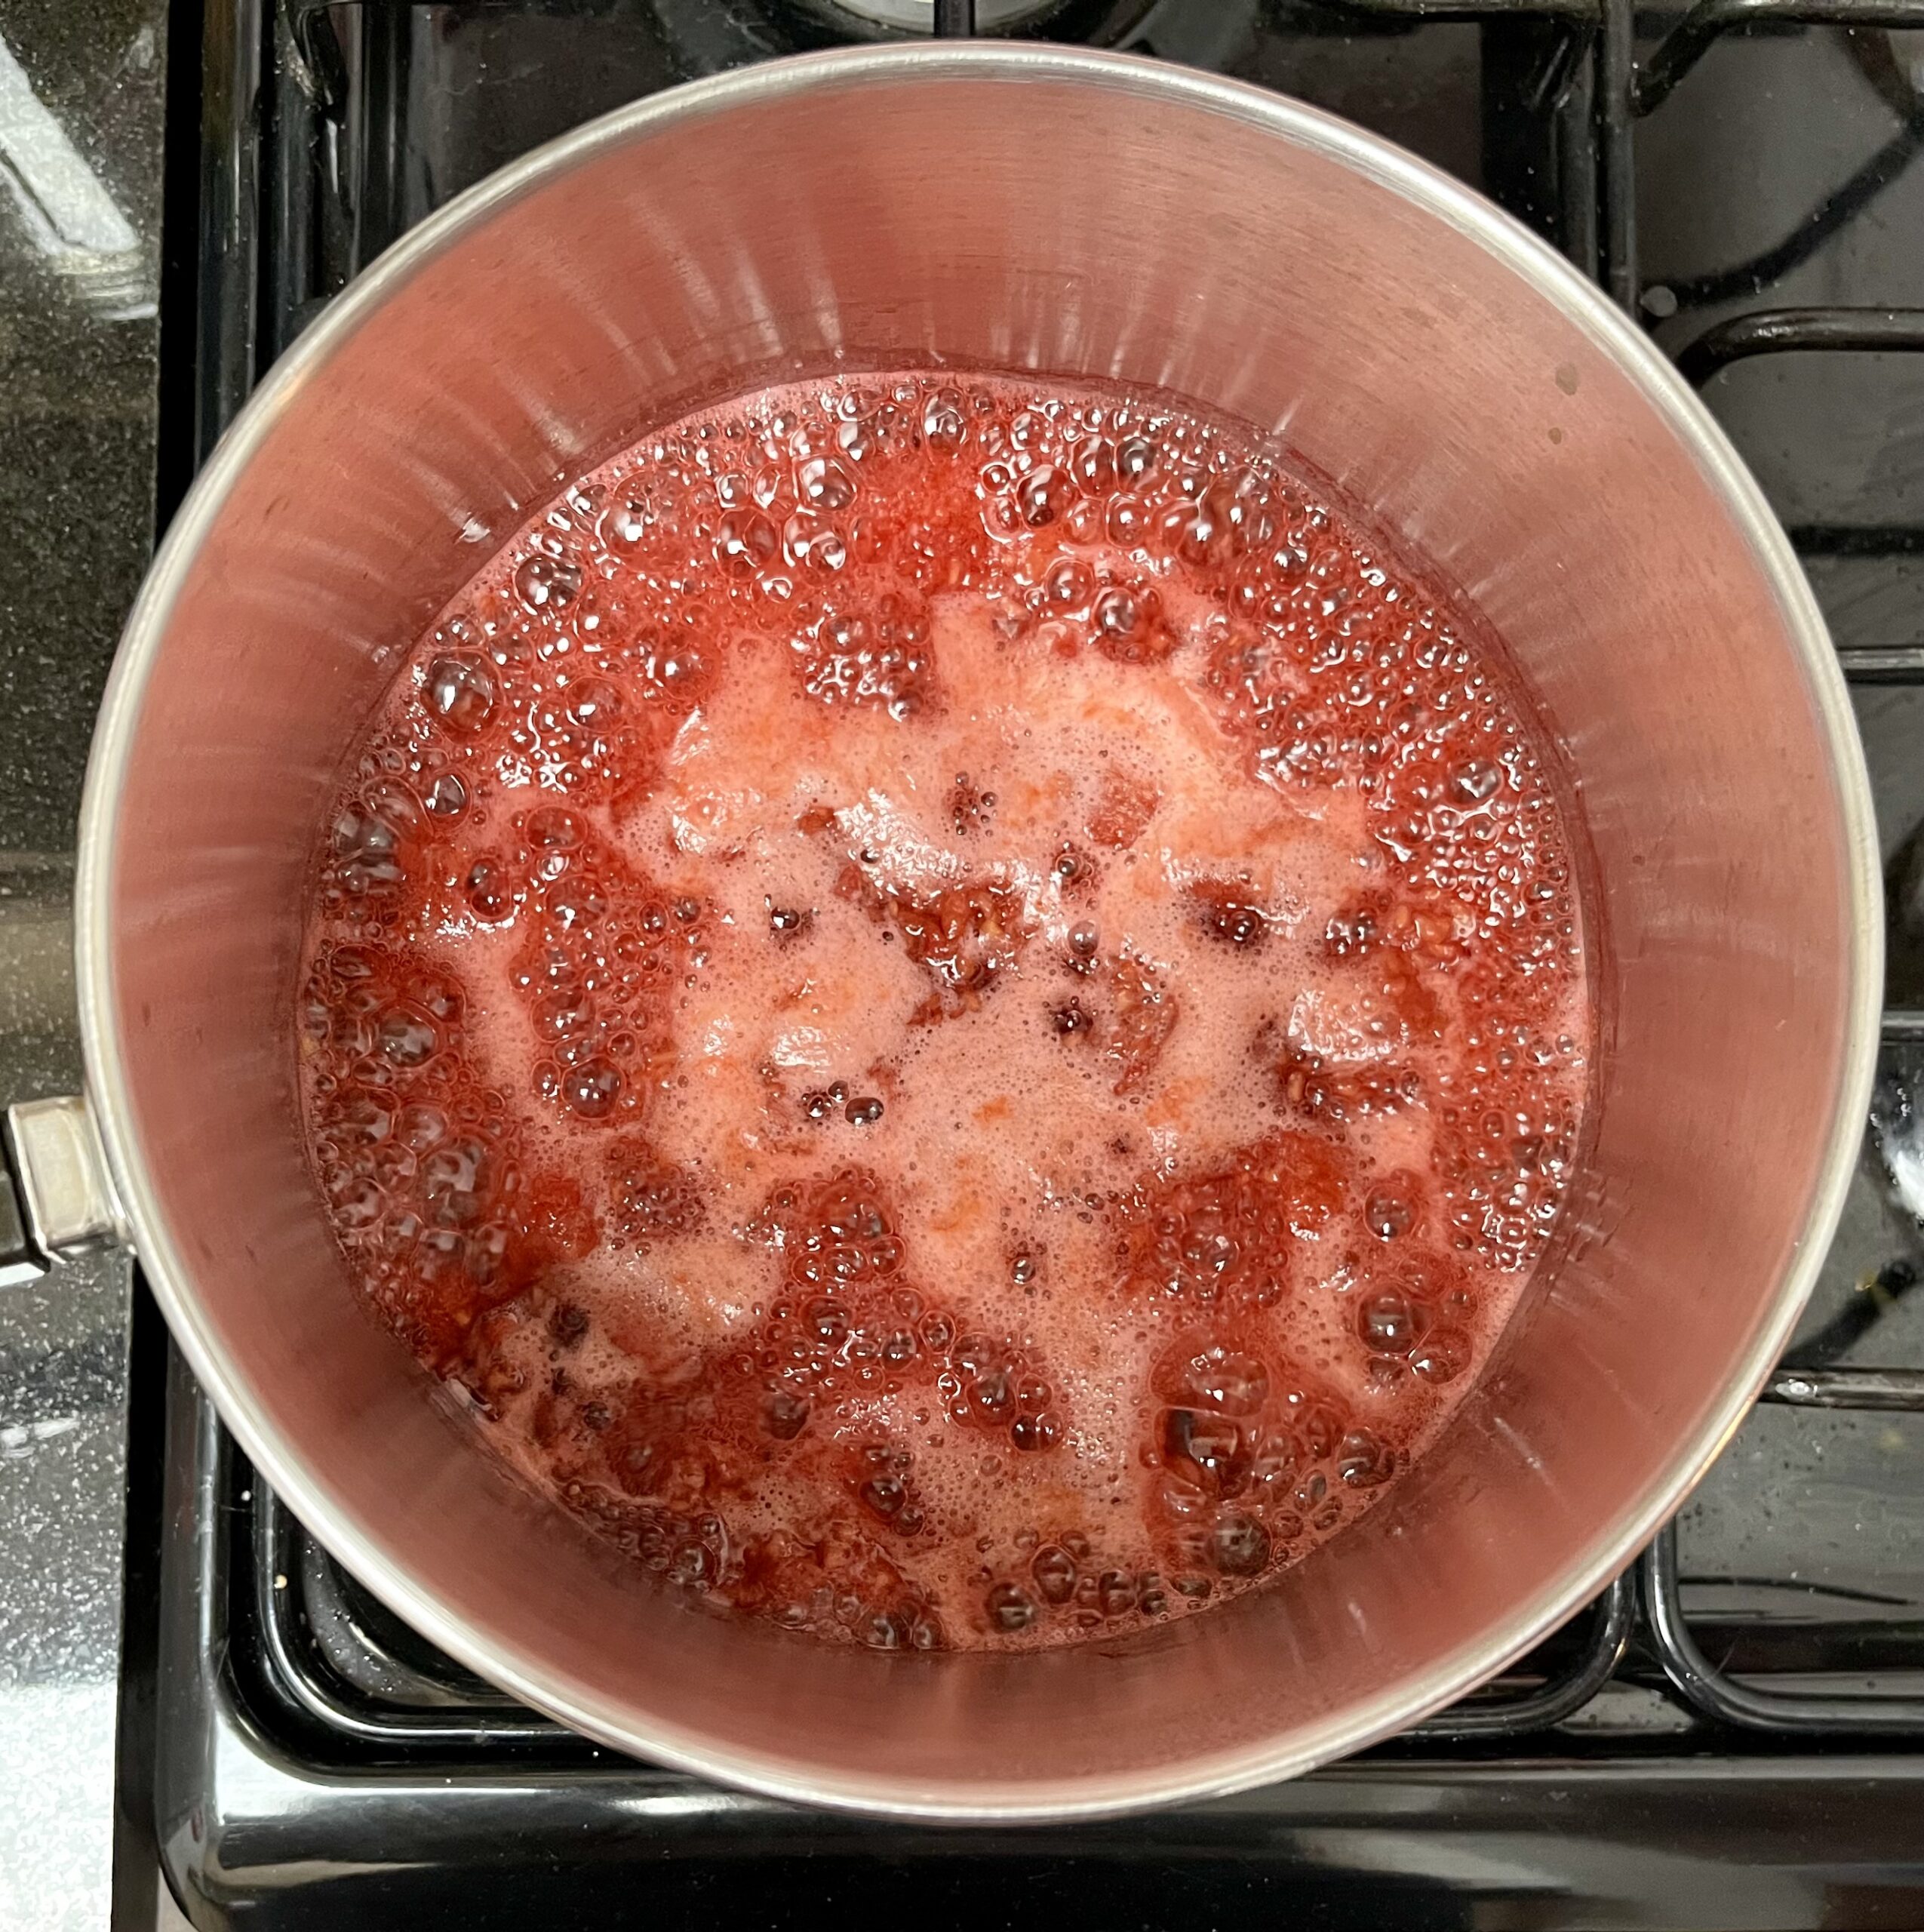 A metal pot sits on a stove filled with bubbling red liquid.